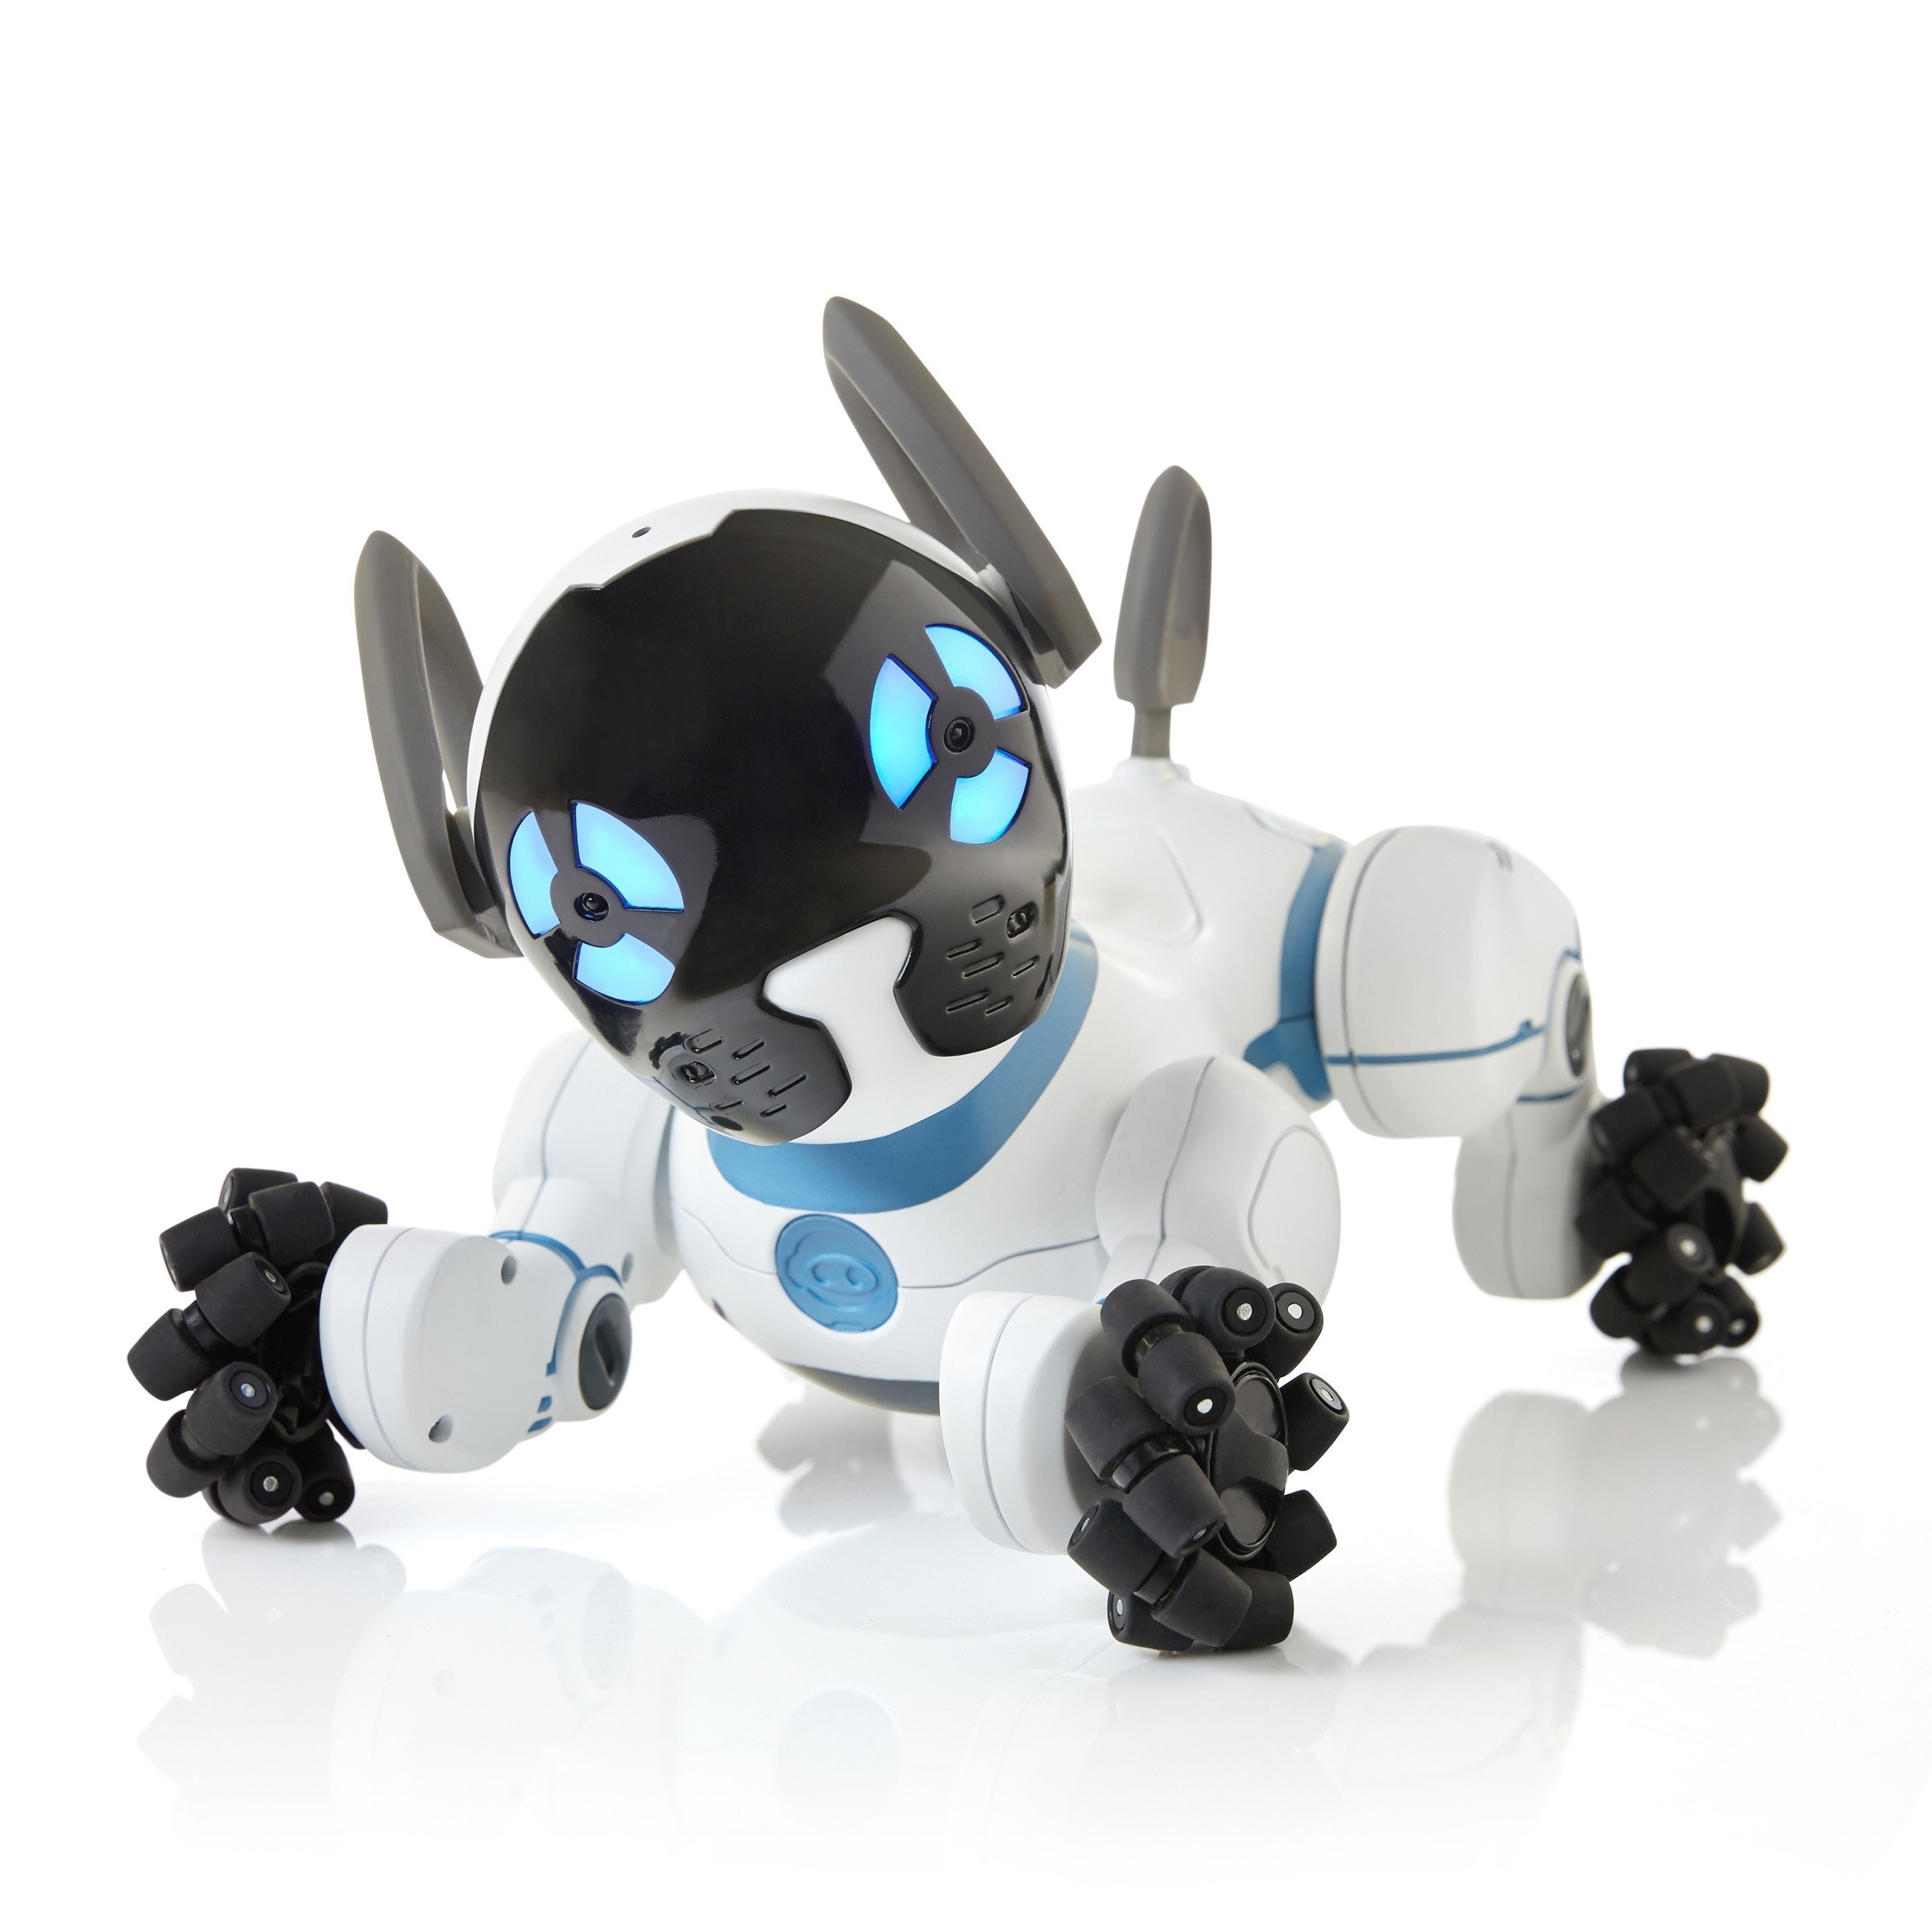 Wowwee S Chip Named A Top Tech Toy Of